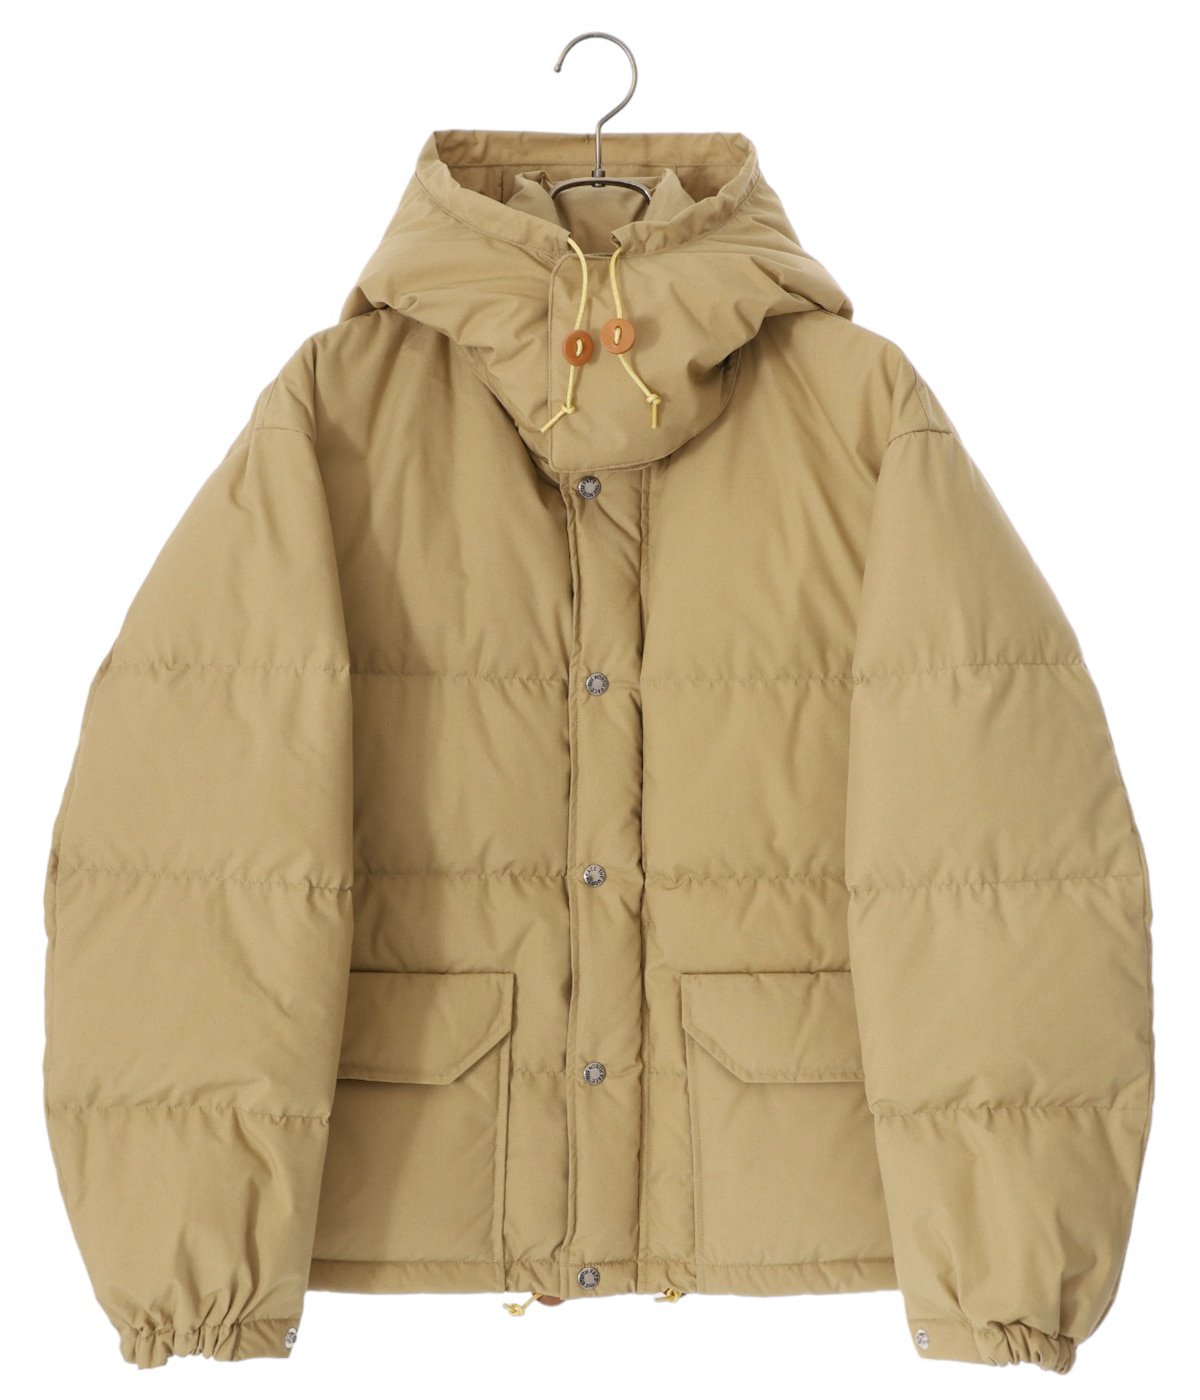 THE NORTH FACE Sierra parka